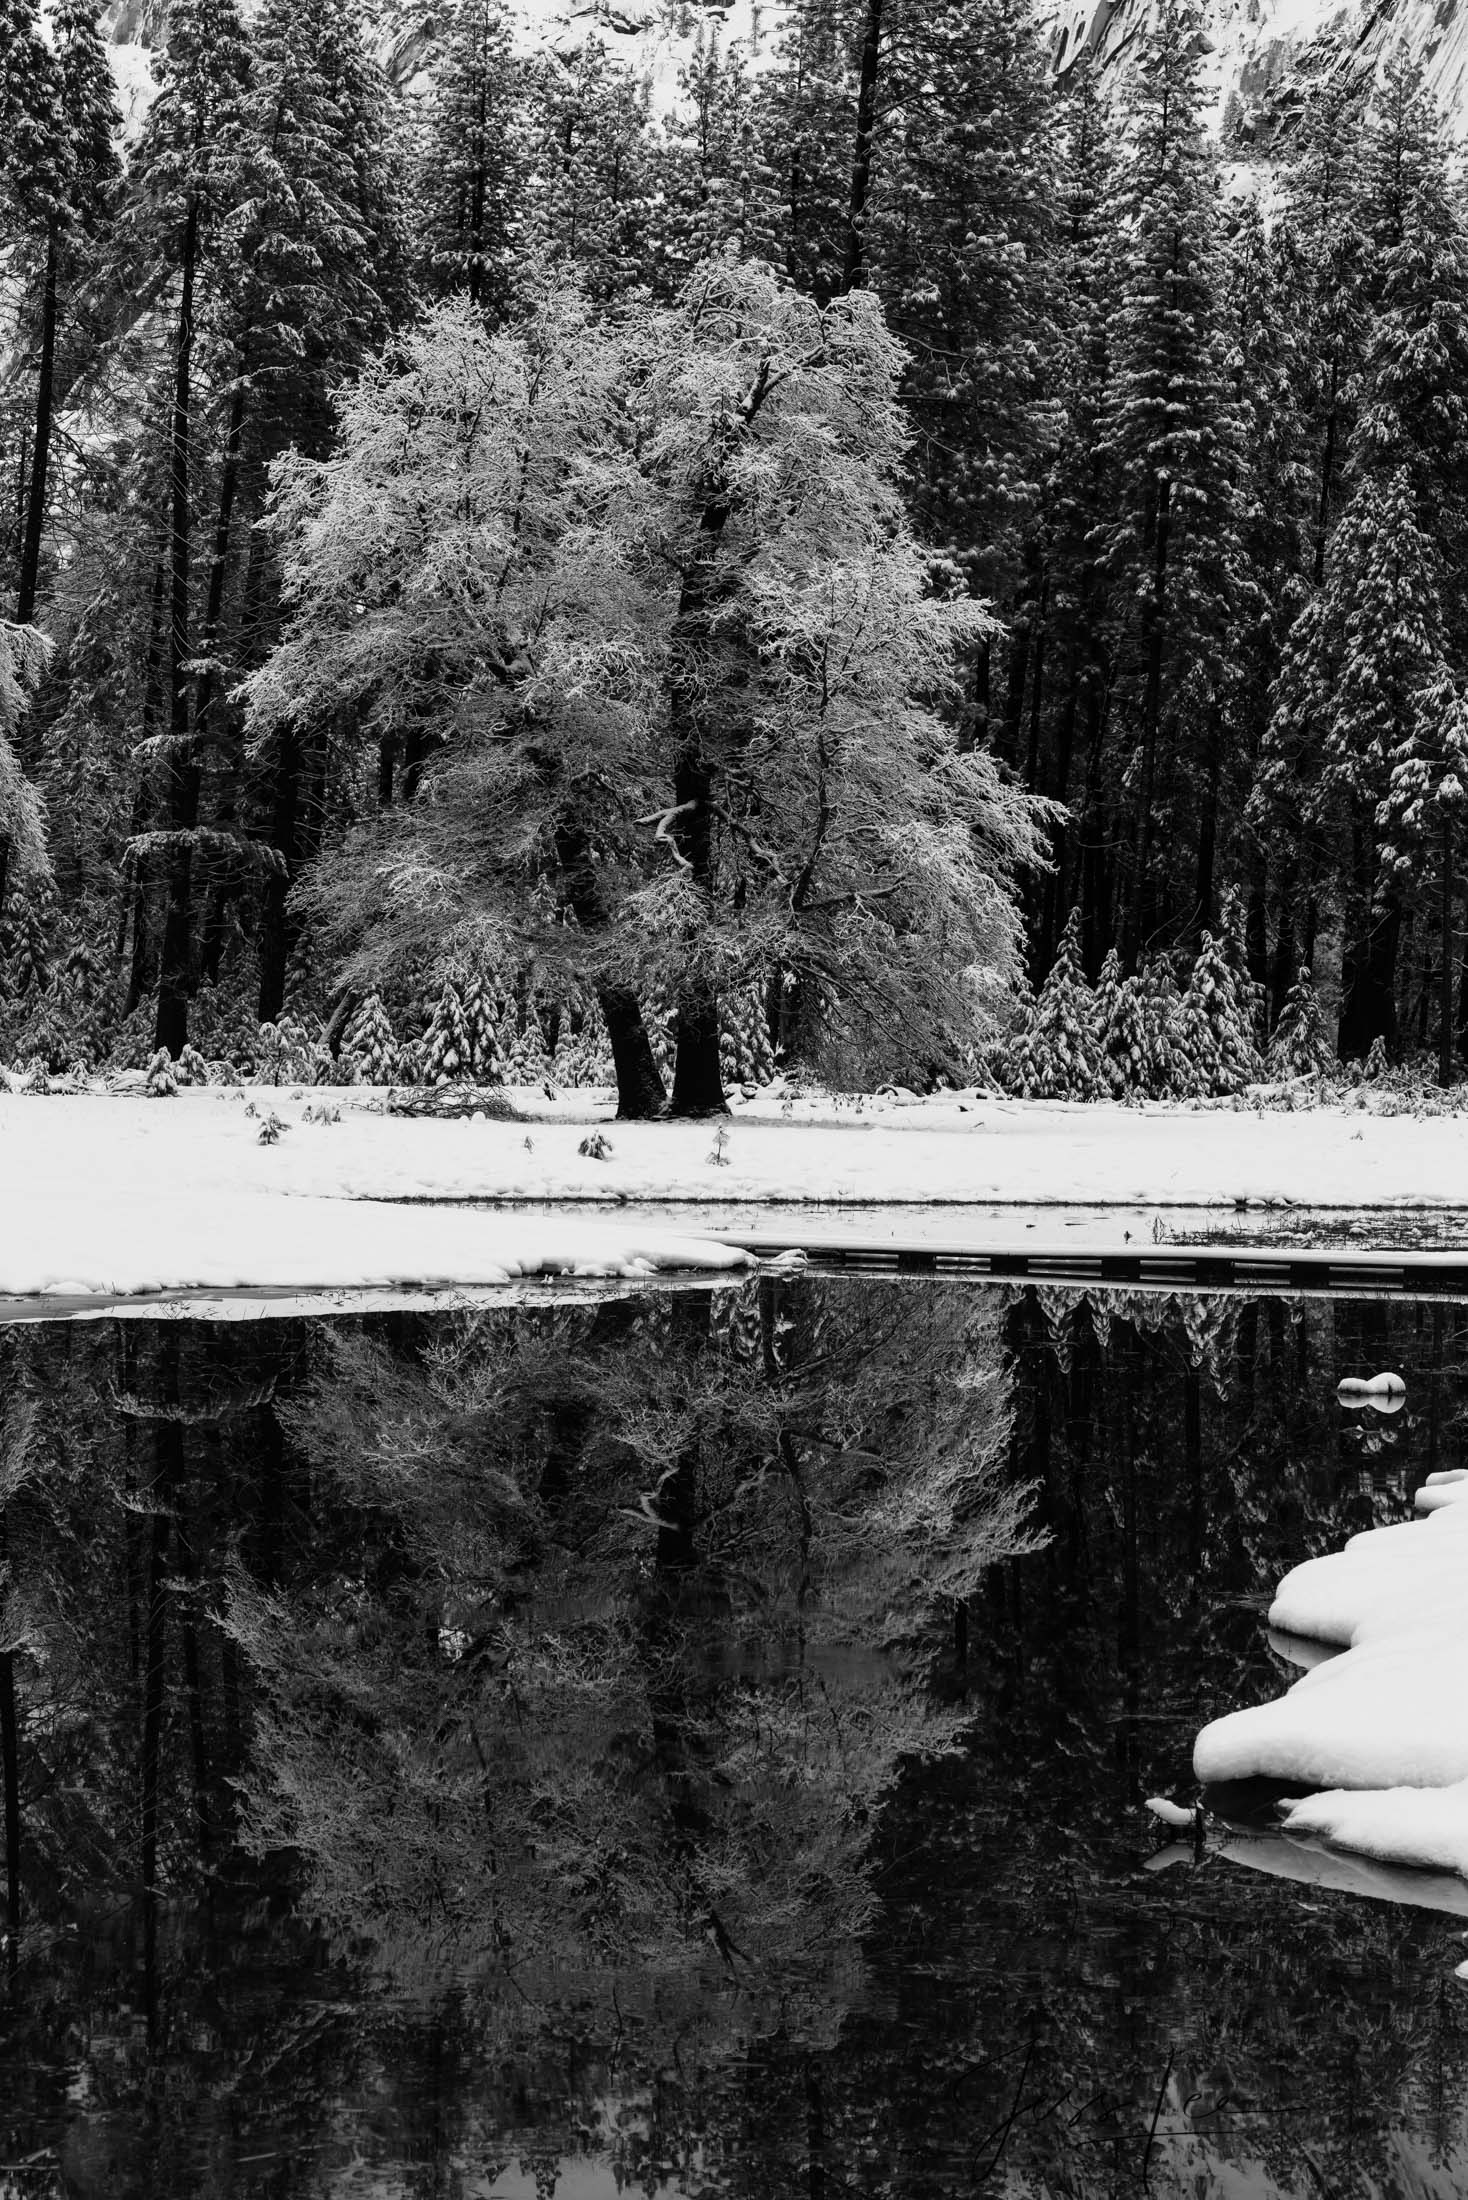 A beautiful Black and White Fine Art Photography Print Of Yosemite in Winter